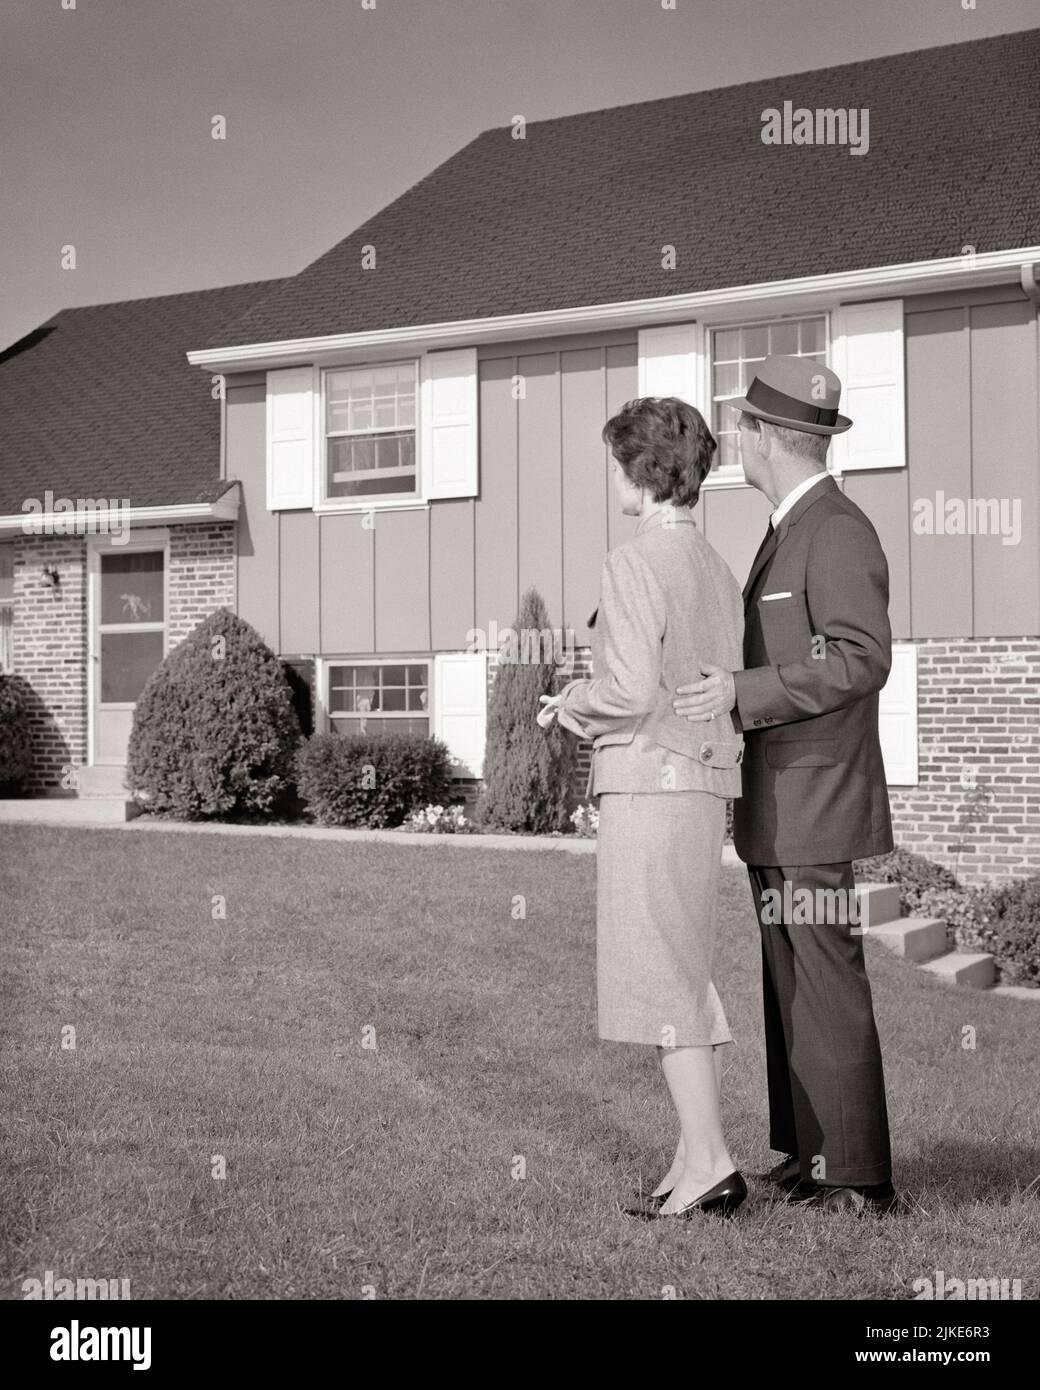 1960s BACK VIEW MAN AND WOMAN COUPLE STANDING IN FRONT LAWN LOOKING AT SPLIT LEVEL SUBURBAN HOUSE - j12435 HAR001 HARS HUSBANDS HOME LIFE COPY SPACE FULL-LENGTH LADIES PERSONS RESIDENTIAL MALES BUILDINGS B&W PARTNER SPLIT SUIT AND TIE DREAMS STRUCTURE PROPERTY AND CHOICE EXTERIOR SPLIT LEVEL REAR VIEW HOMES REAL ESTATE CONNECTION CONCEPTUAL FROM BEHIND STRUCTURES RESIDENCE STYLISH EDIFICE IN FRONT OF BACK VIEW COOPERATION LEVEL MID-ADULT MID-ADULT MAN MID-ADULT WOMAN WIVES BLACK AND WHITE CAUCASIAN ETHNICITY HAR001 OLD FASHIONED SHUTTERS Stock Photo